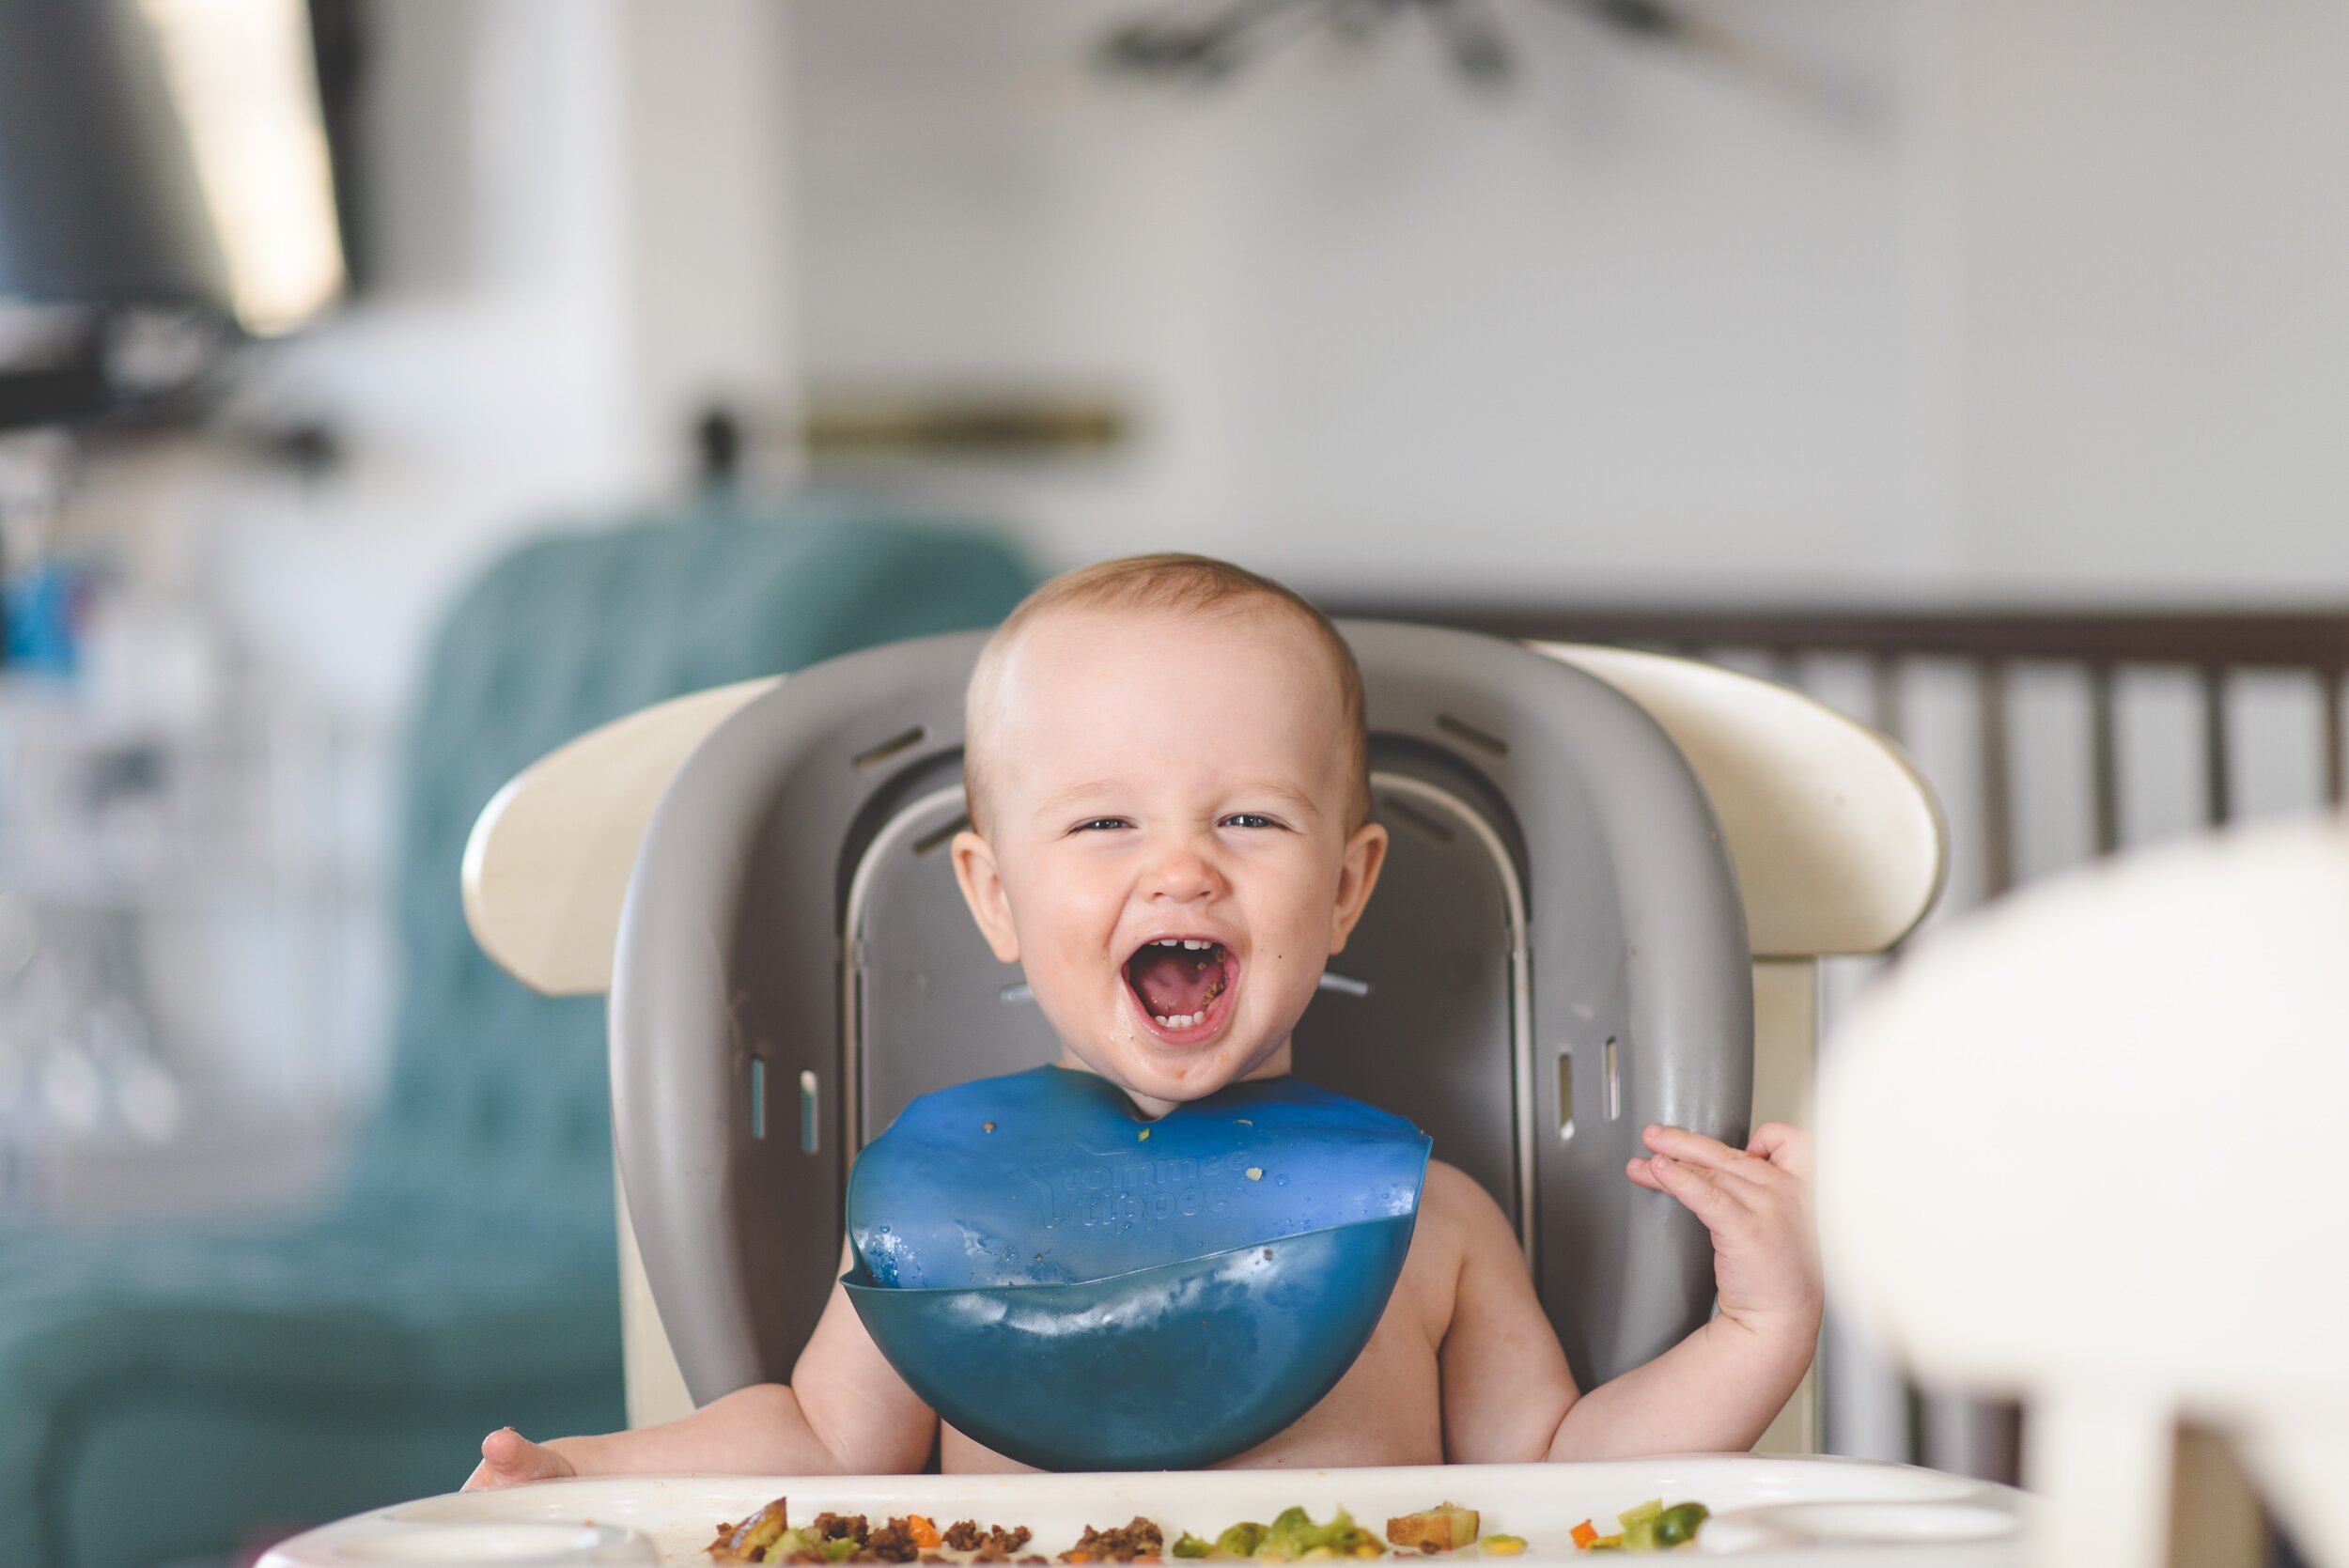 11 Foods for Baby-Led Weaning and What Foods to Avoid